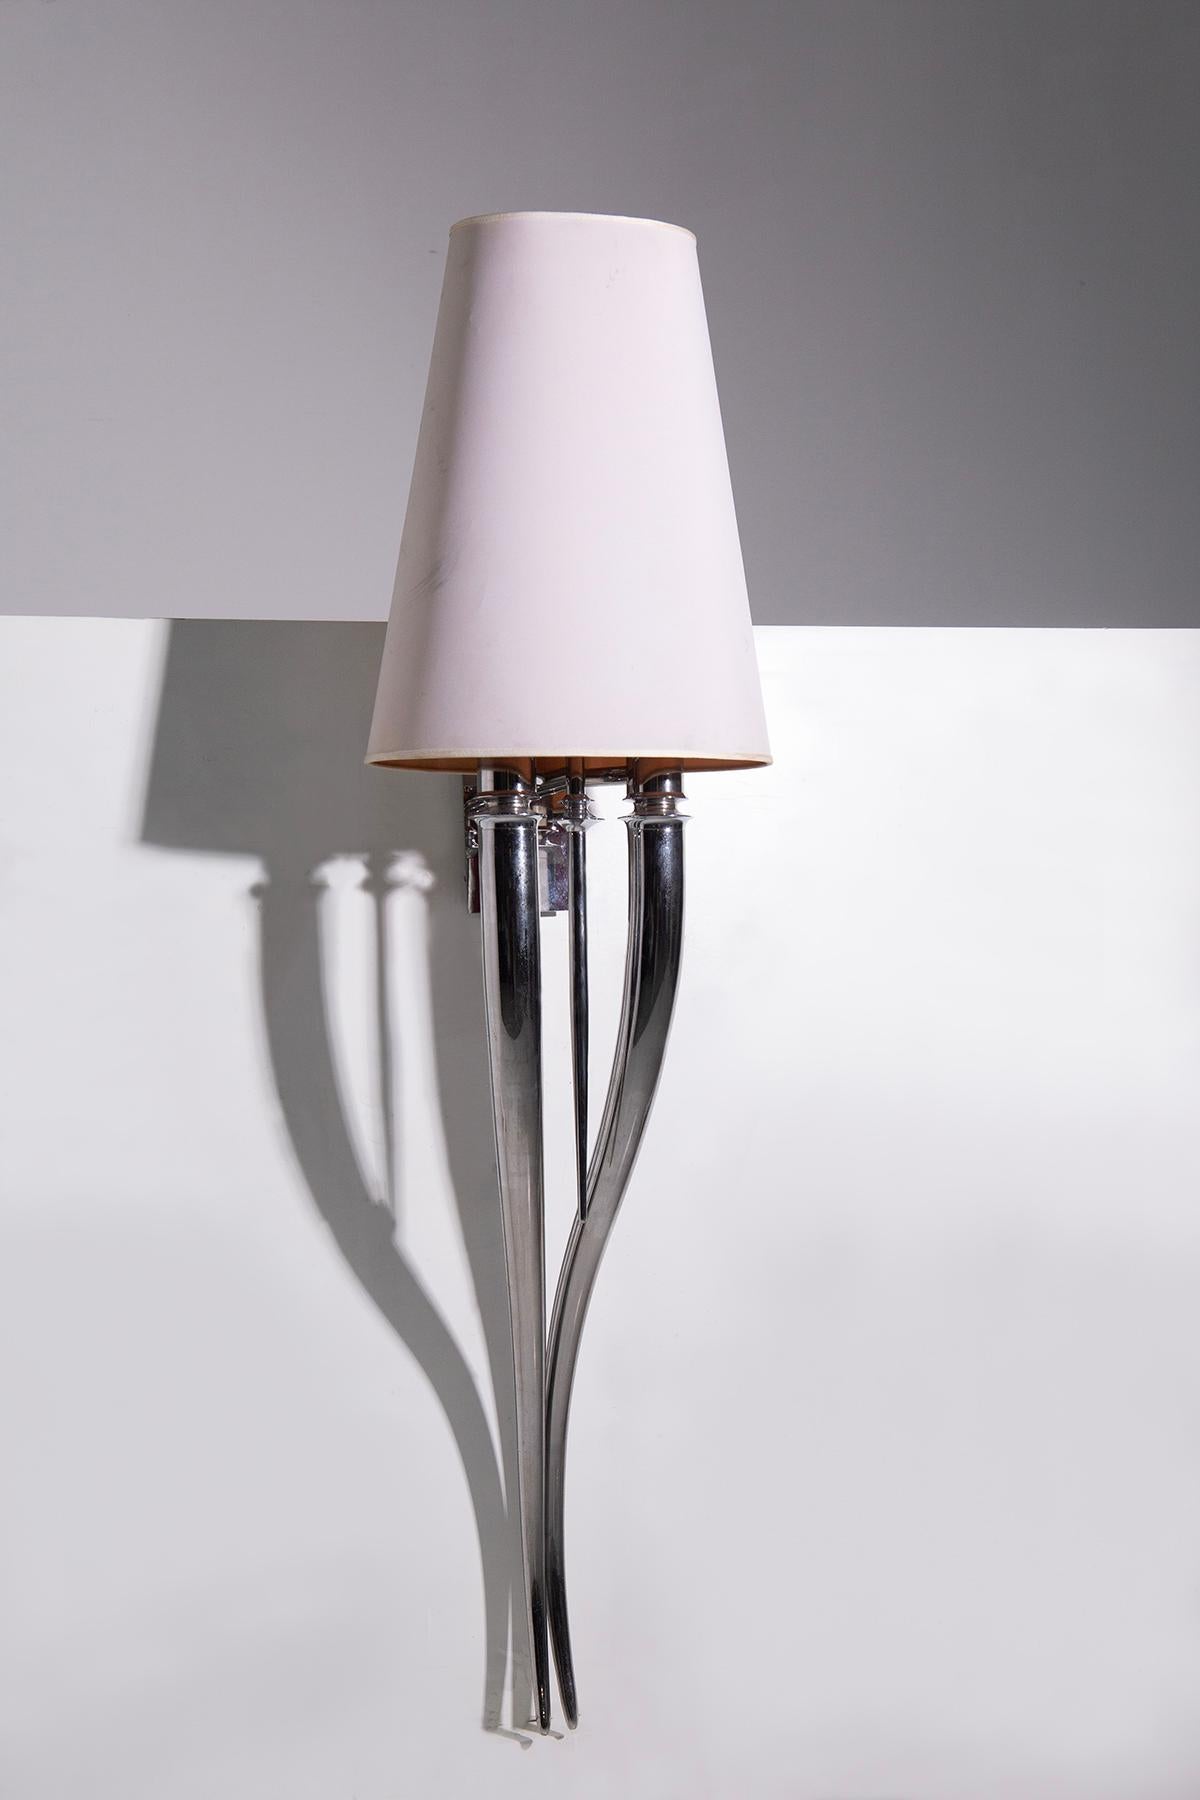 A magnificent Italian Deco-style wall lamp from the 1980s, this elegant piece showcases the timeless elegance and intricate artistry of the Art Deco style with the modernity of the 1980s. The lamp's structure features a sturdy nickel-plated brass